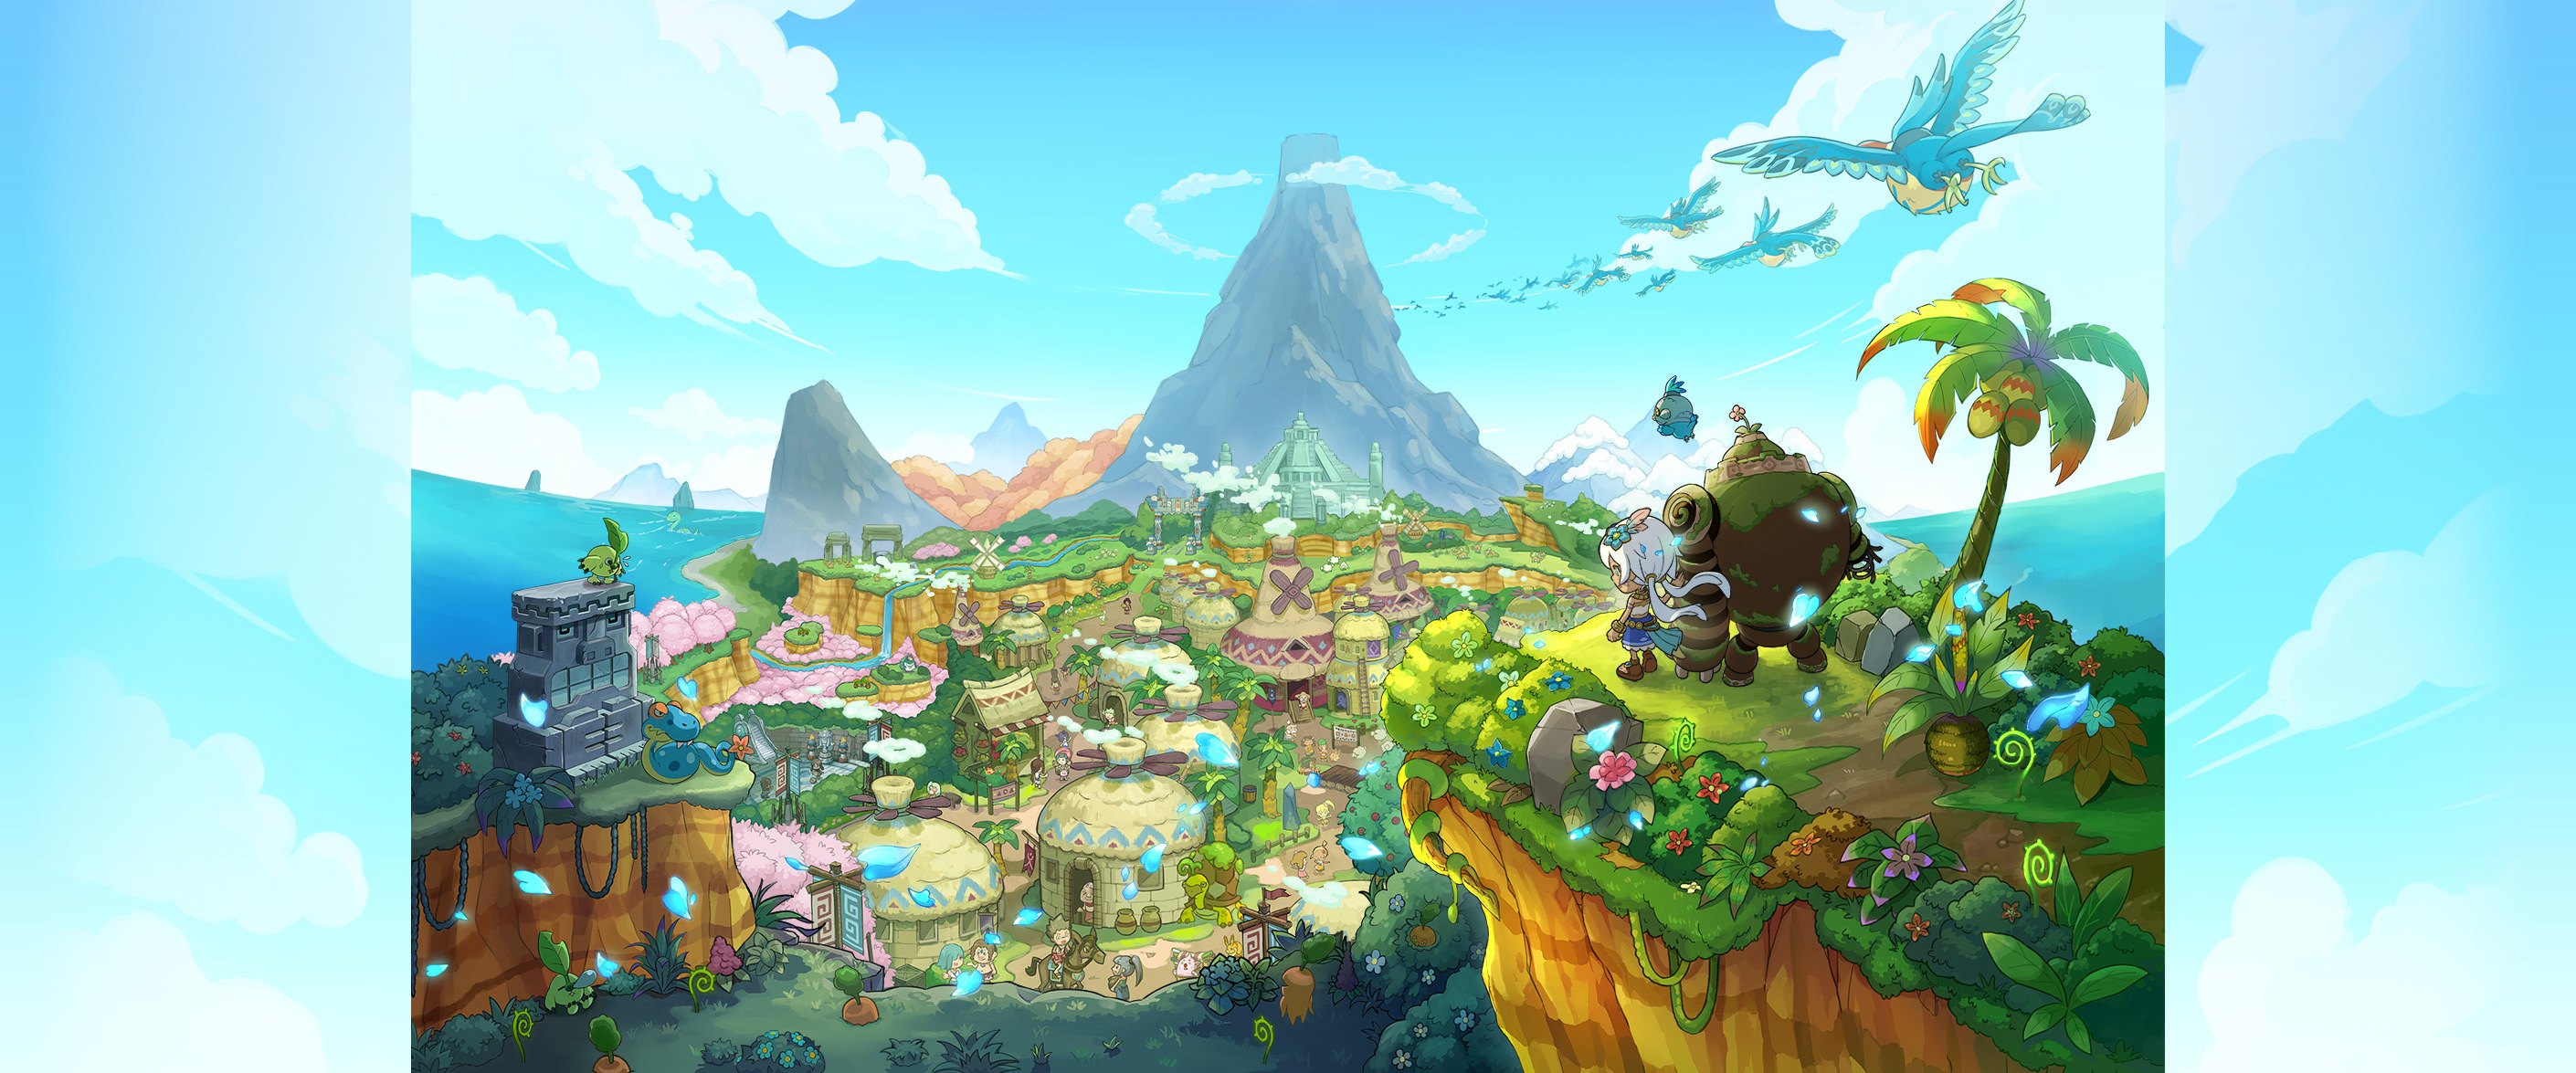 Fantasy Life i reconciles level 5 with its most unique RPG